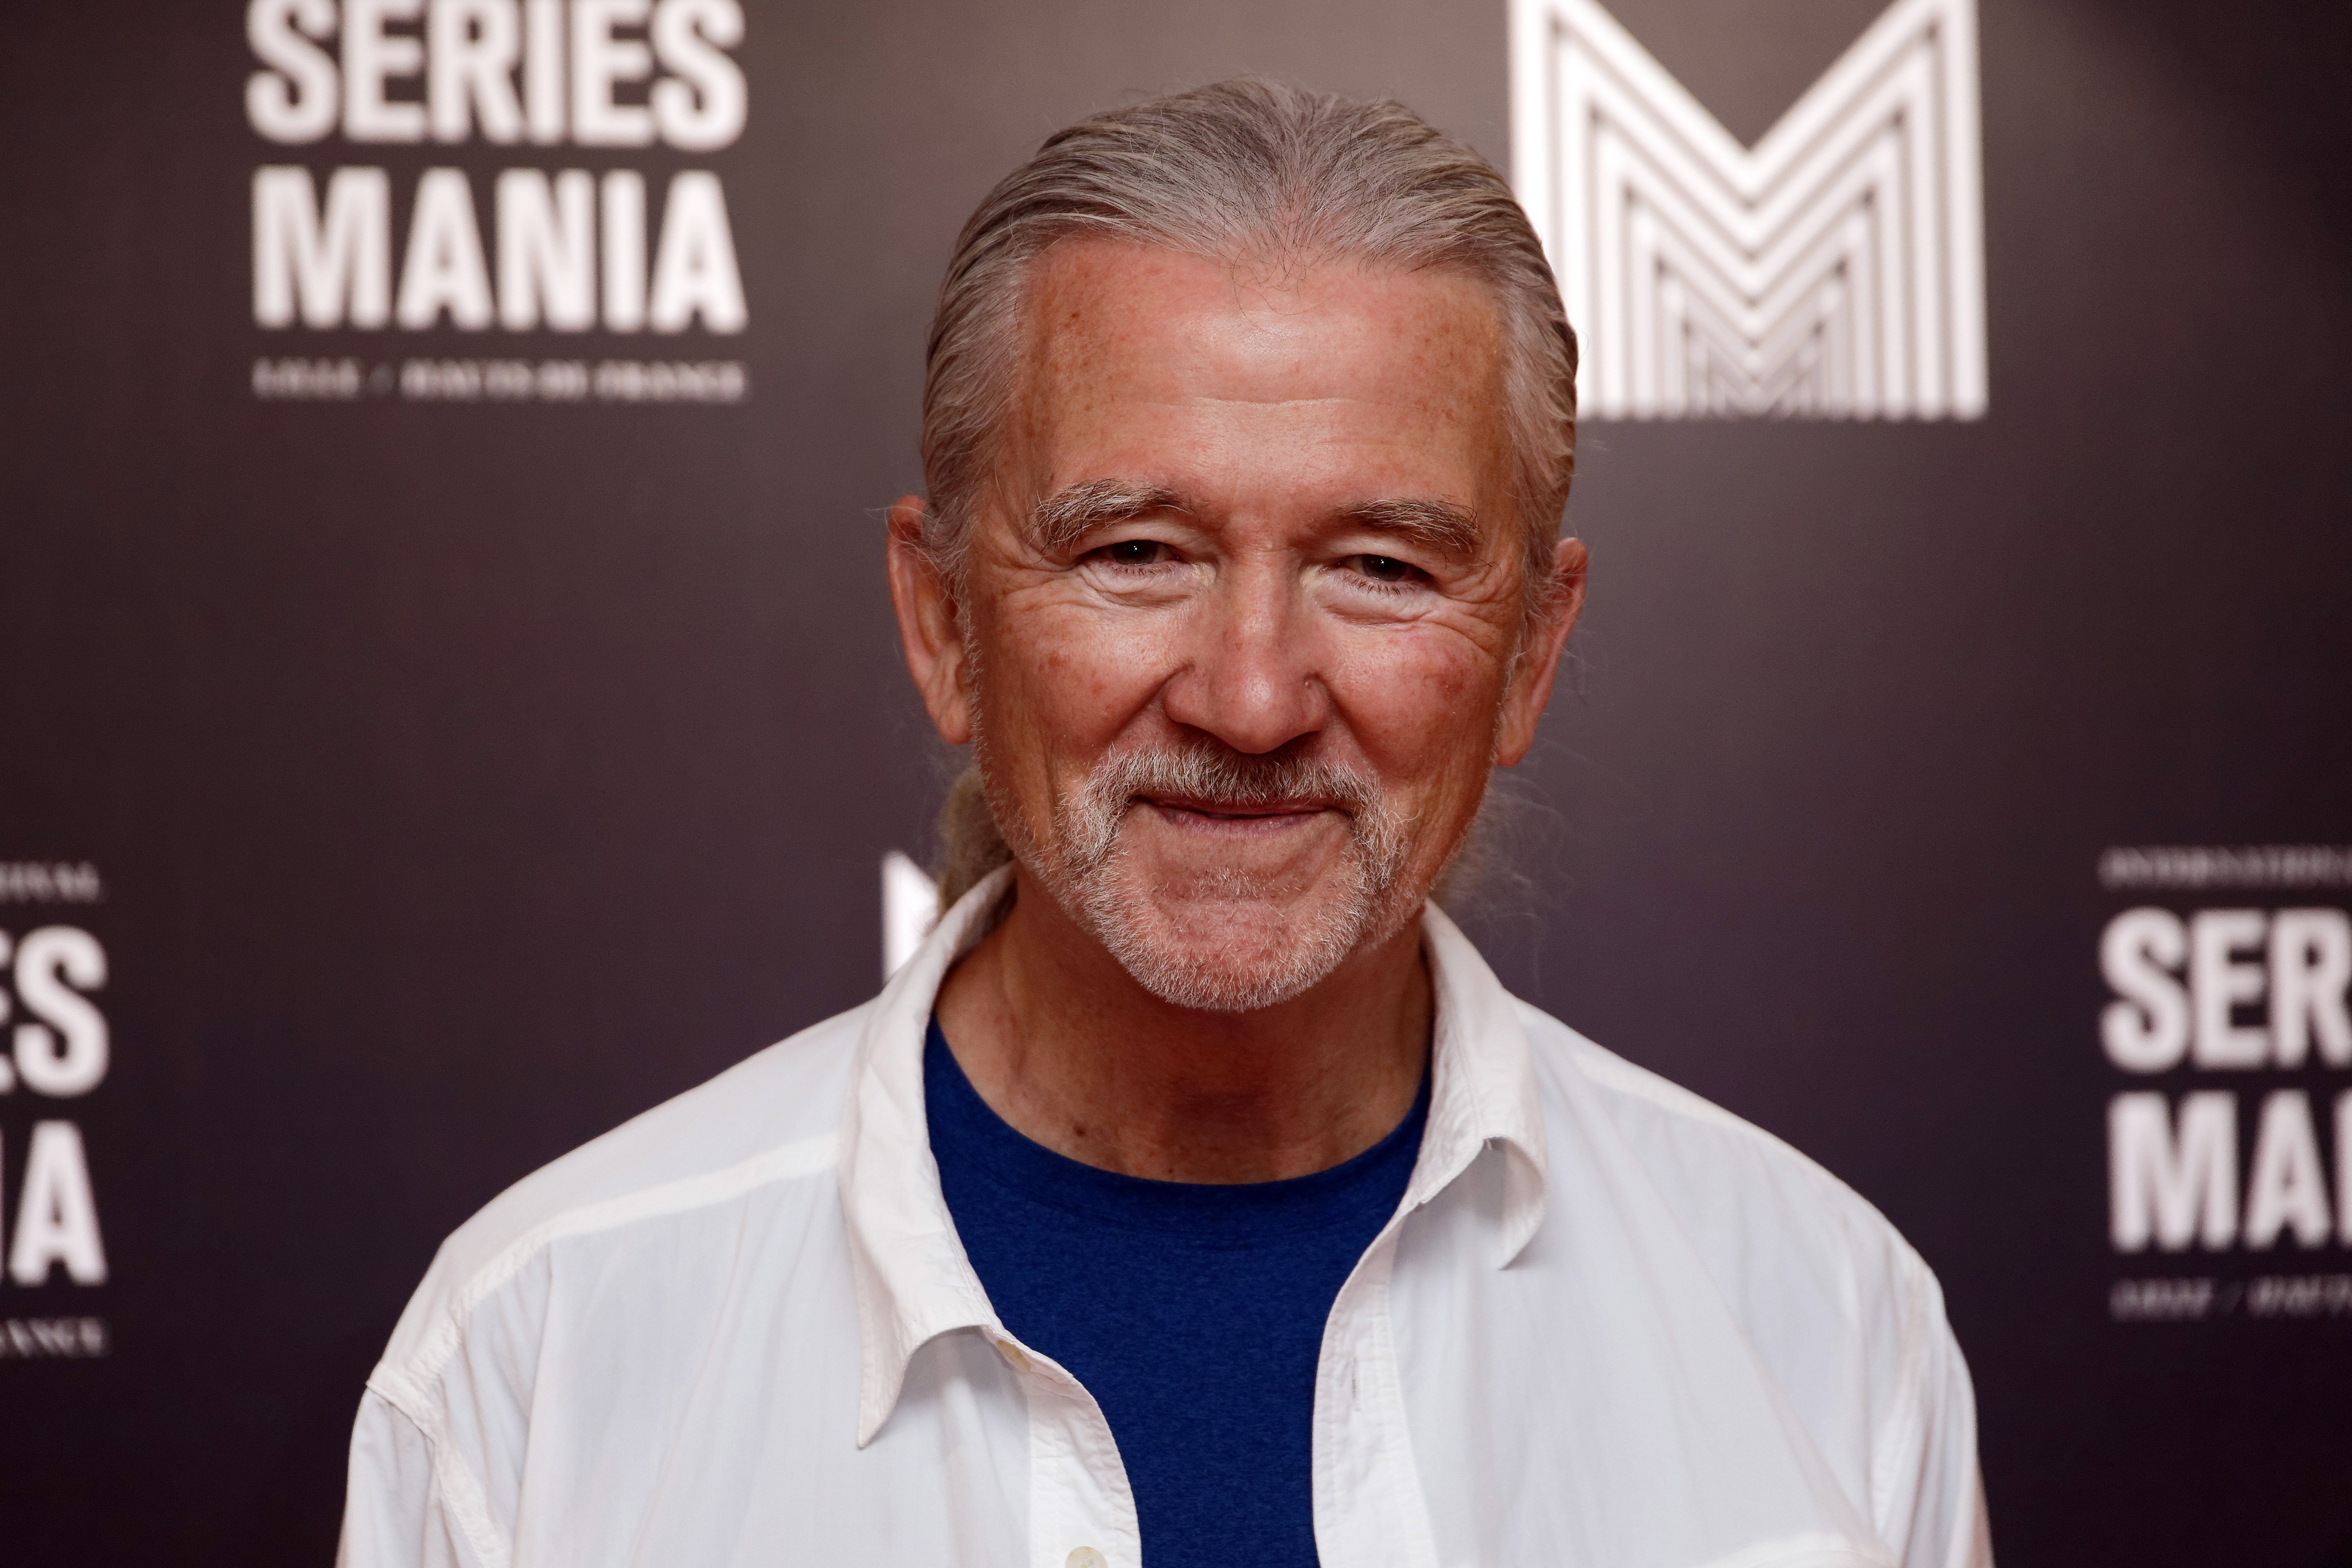 Veteran actor Patrick Duffy attends the Mania series in Lille, France on May 2, 2018 |  Photo: Getty Images